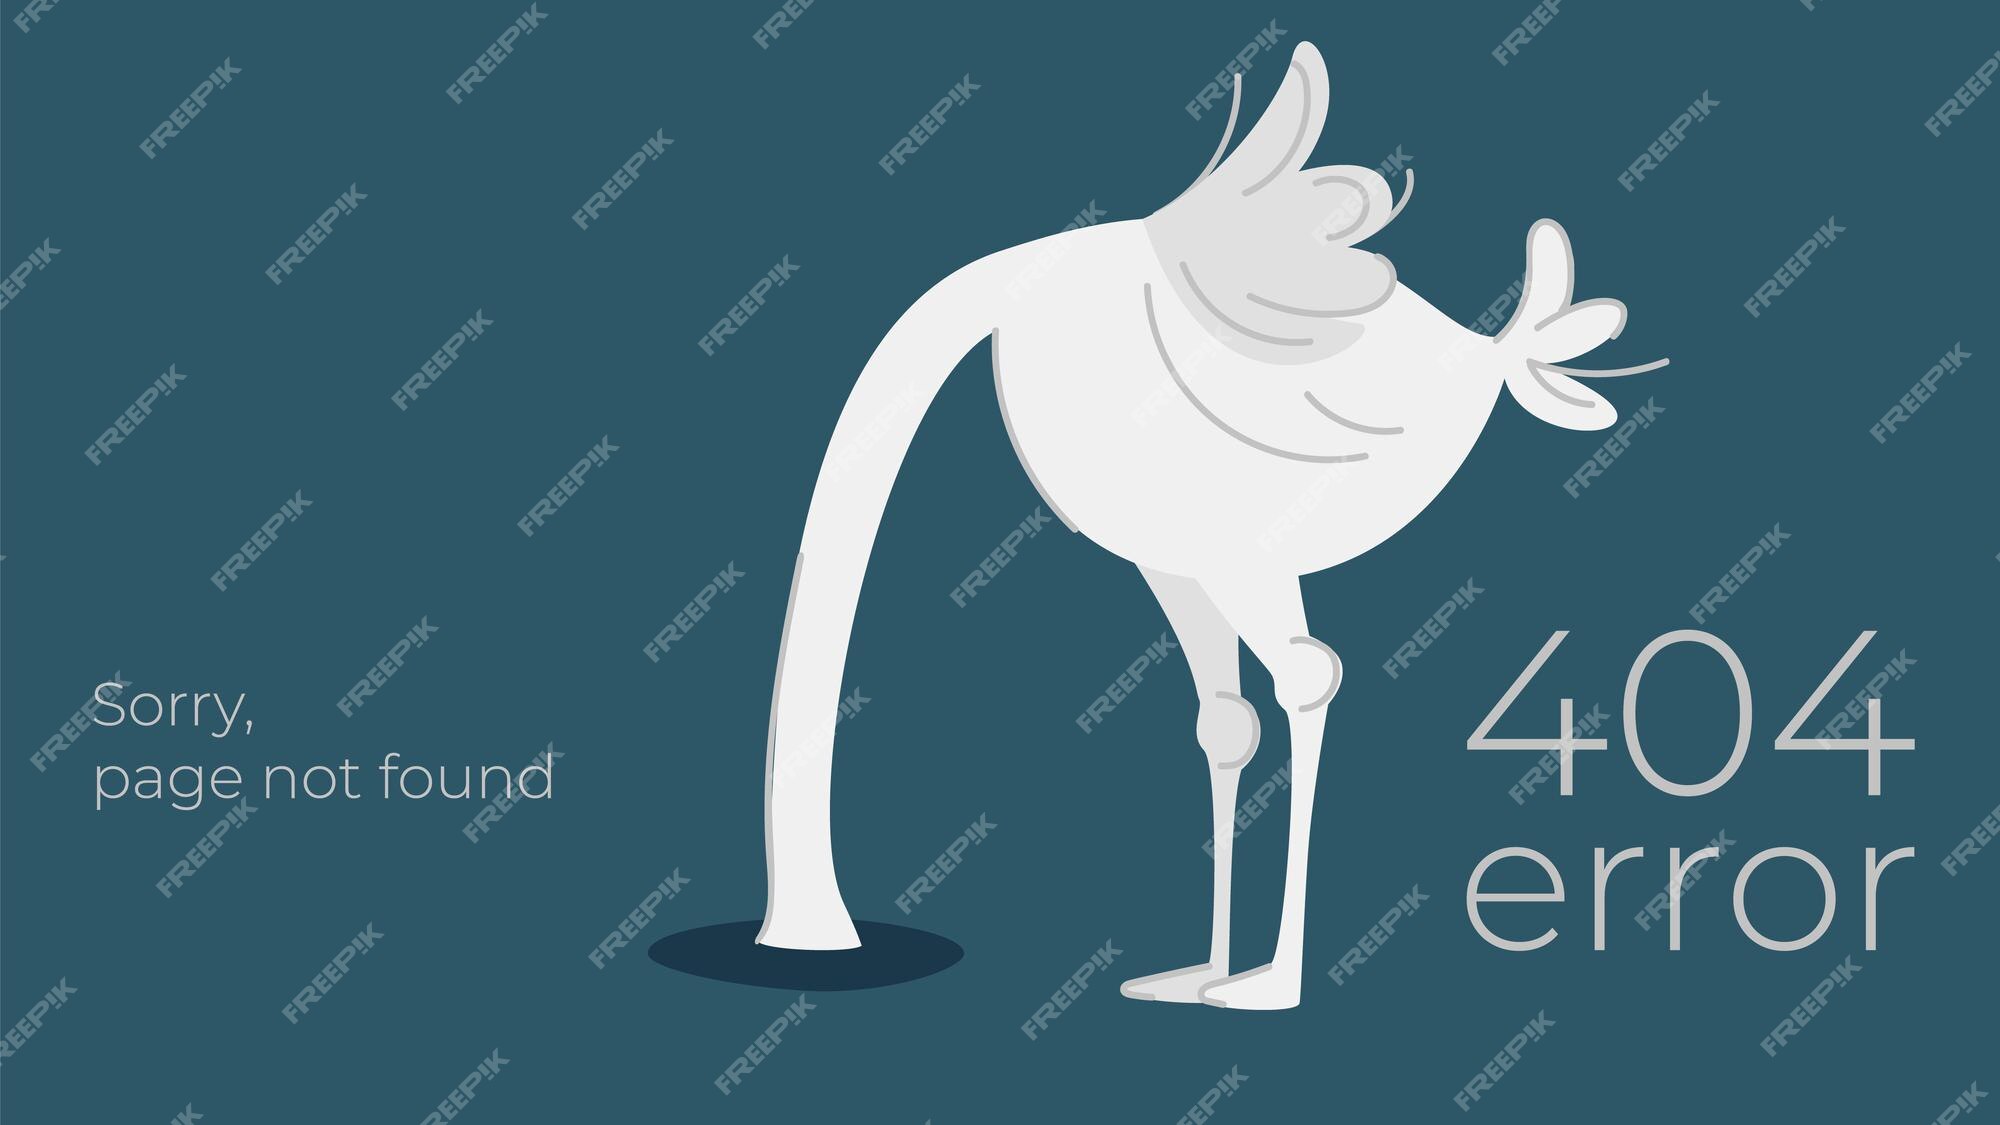 Premium Vector | Illustration of internet connection problem concept. 404  error page not found isolated in black background. the ostrich will bury  its head in the sand ignoring the problems. funny vector illustration.